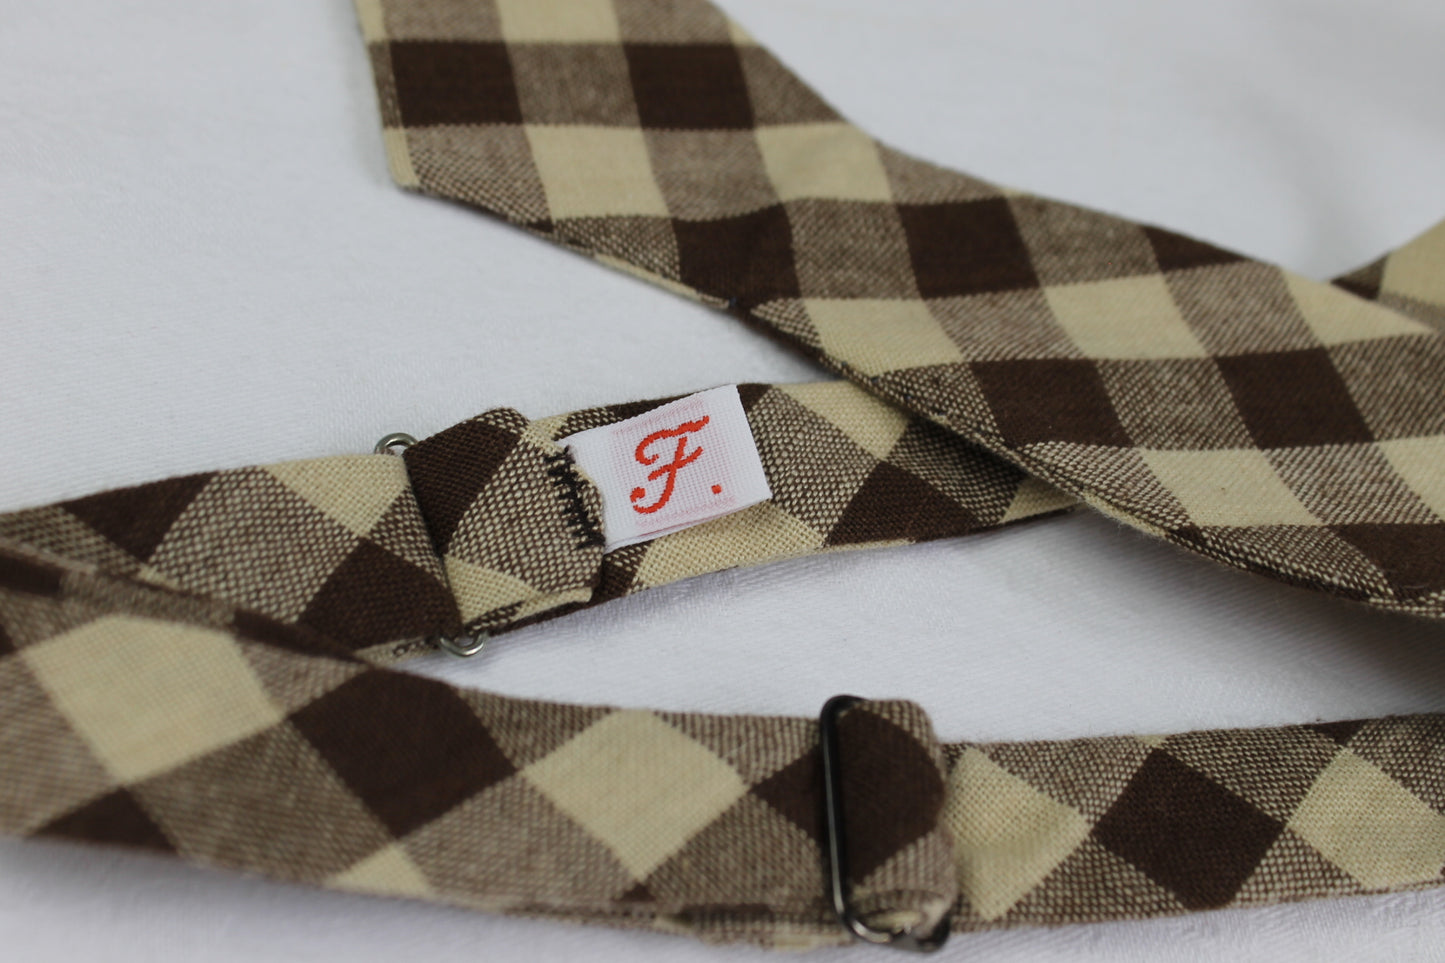 Farah Brown Cream Check Self Tie Thistle Point End Bow Tie